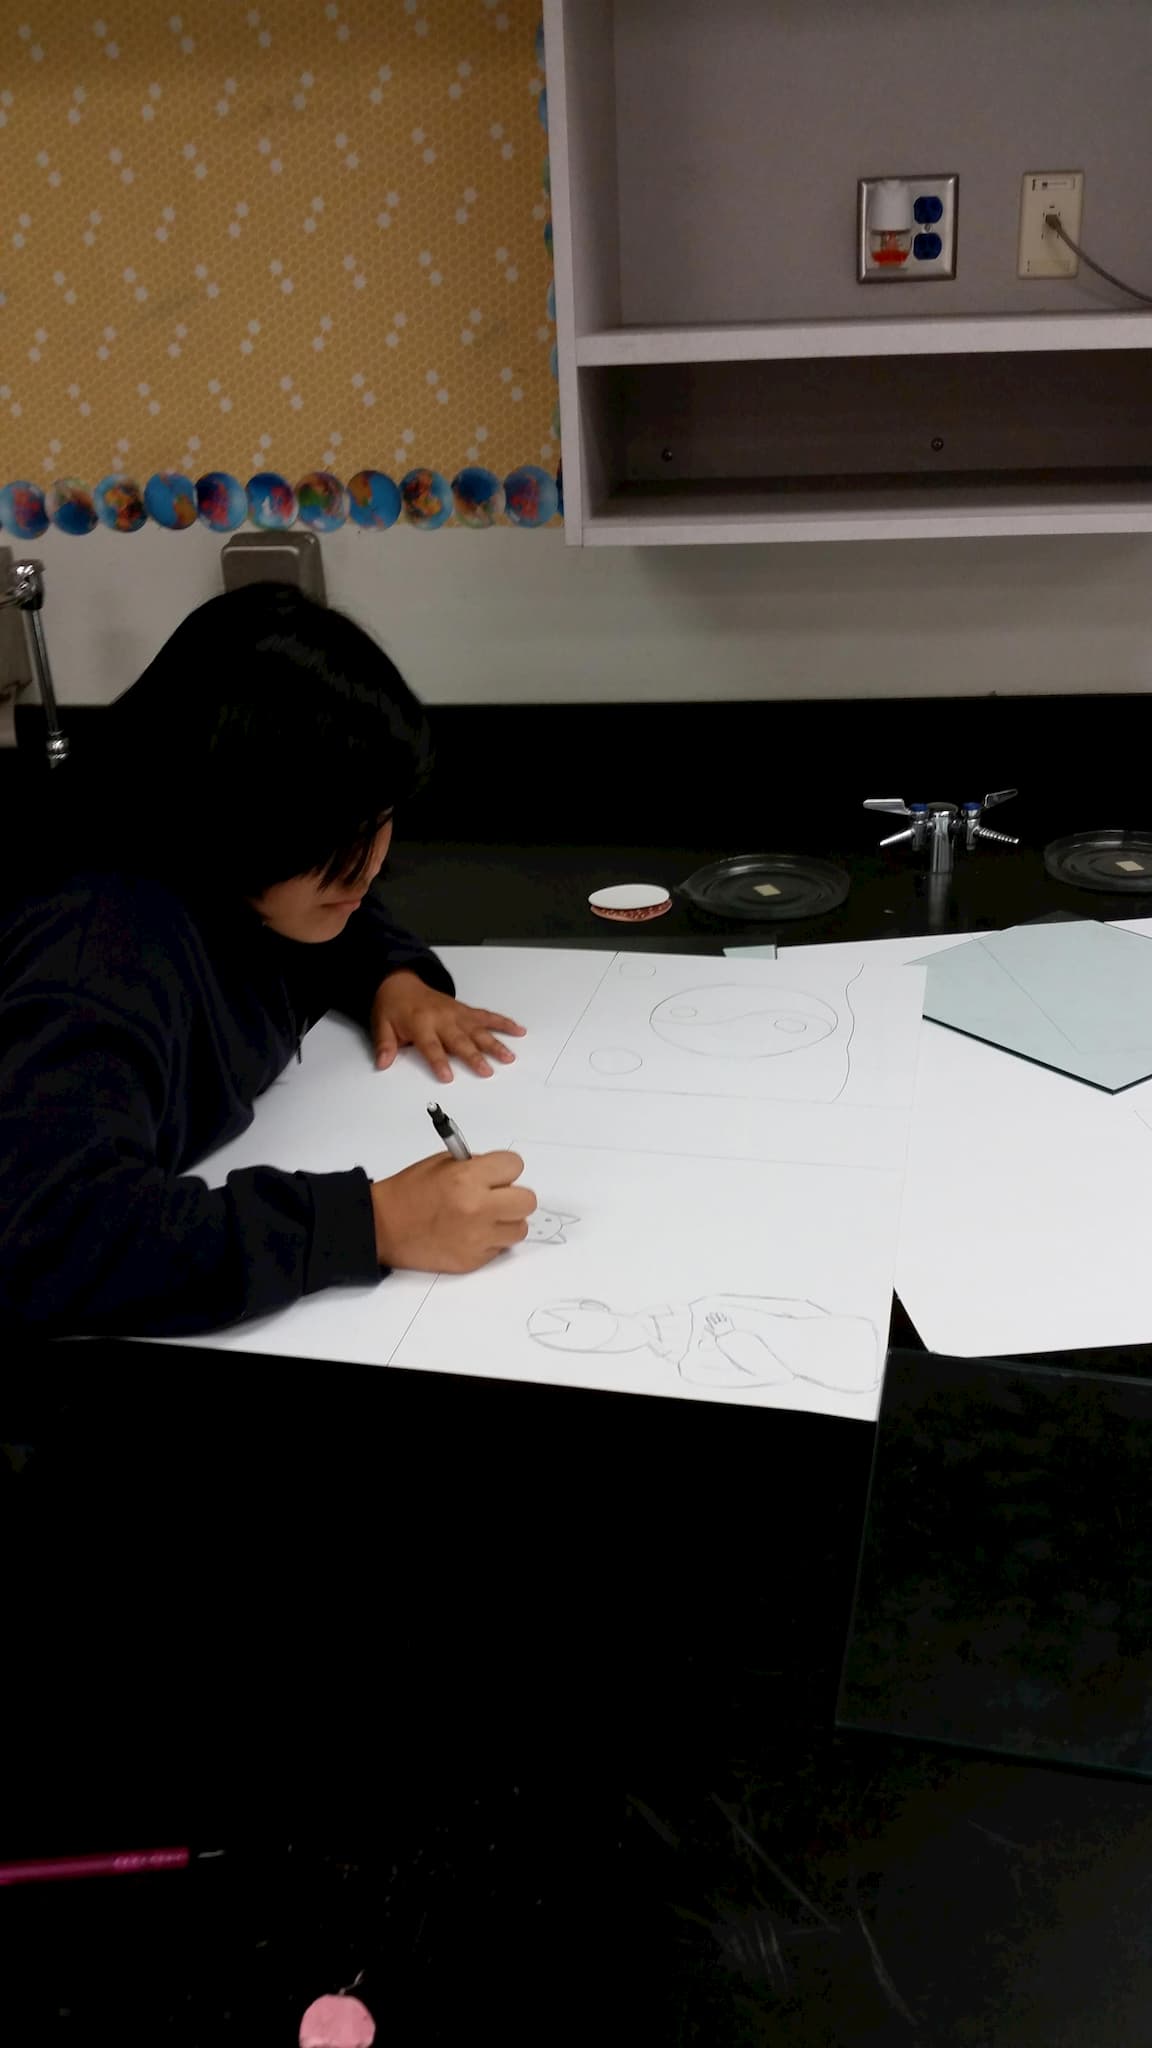 Student working on drawing